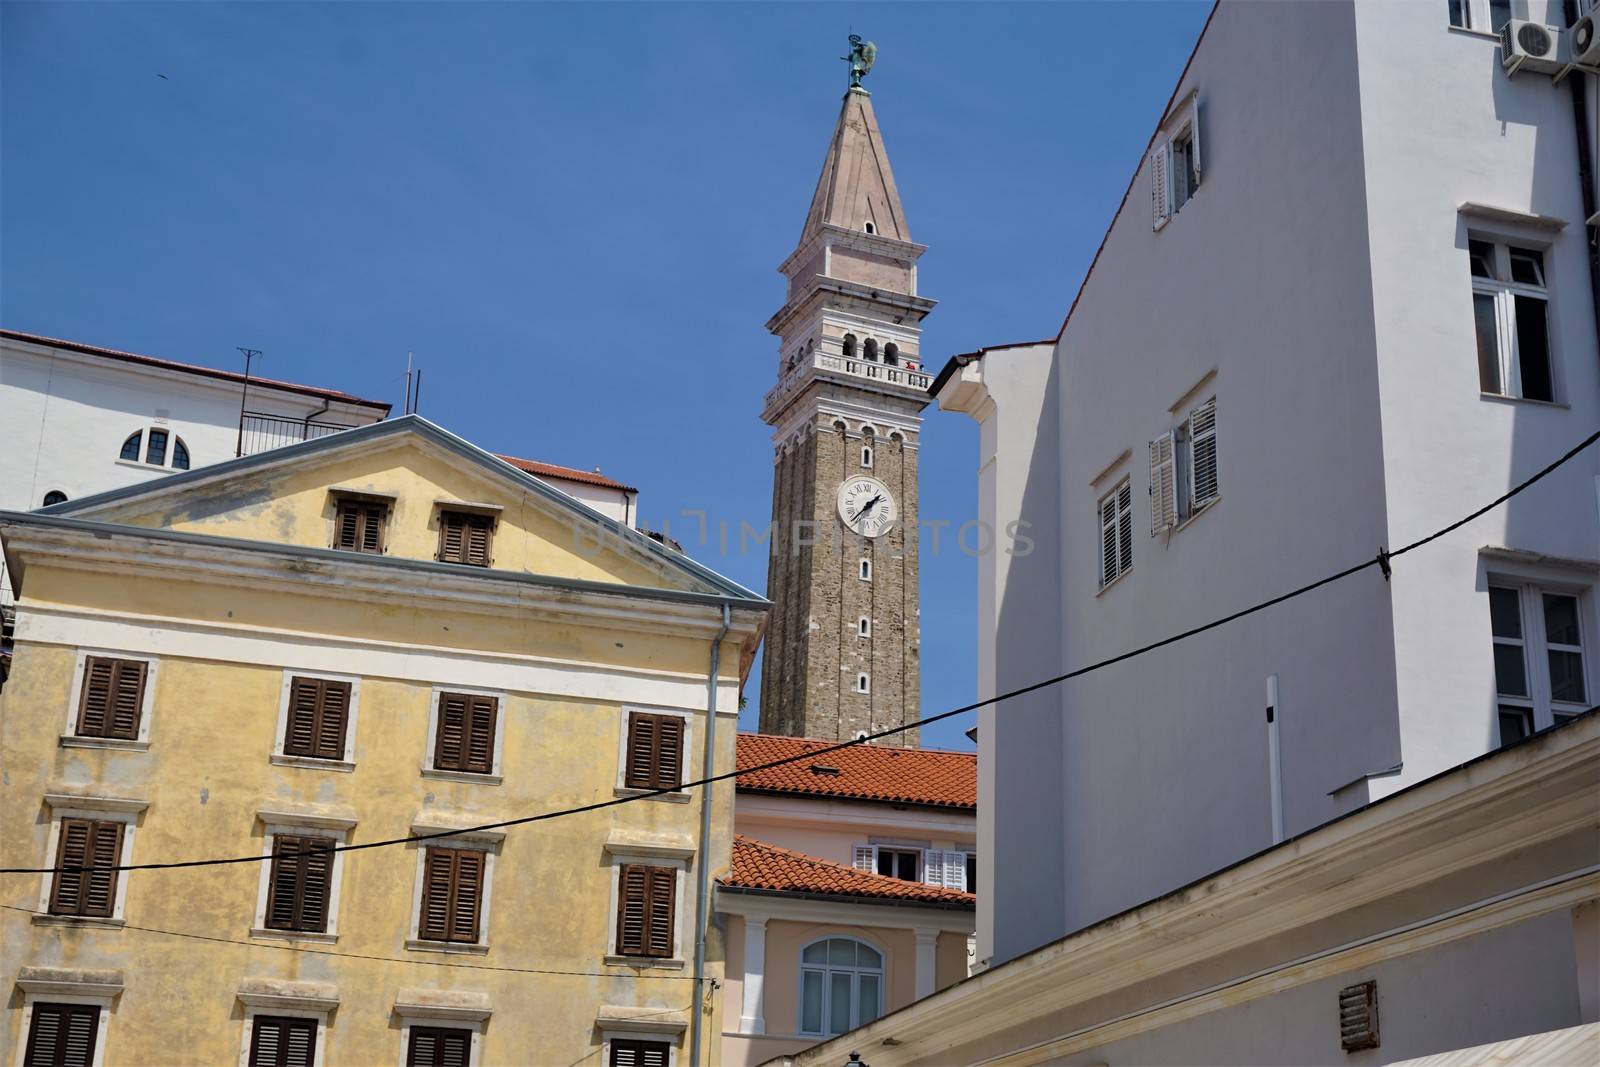 The campanile bell tower of Piran by pisces2386